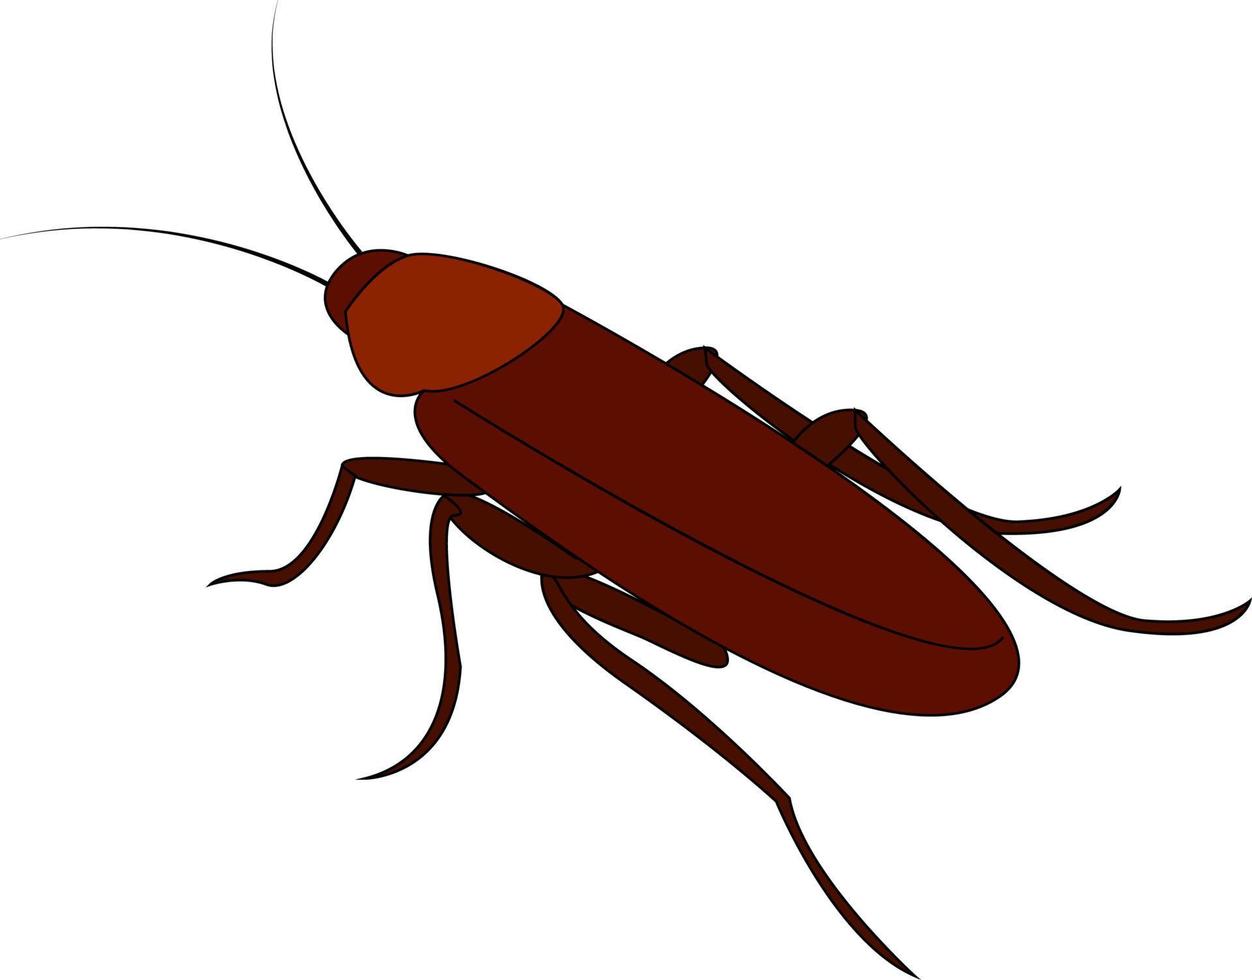 Brown cockroach, illustration, vector on white background.